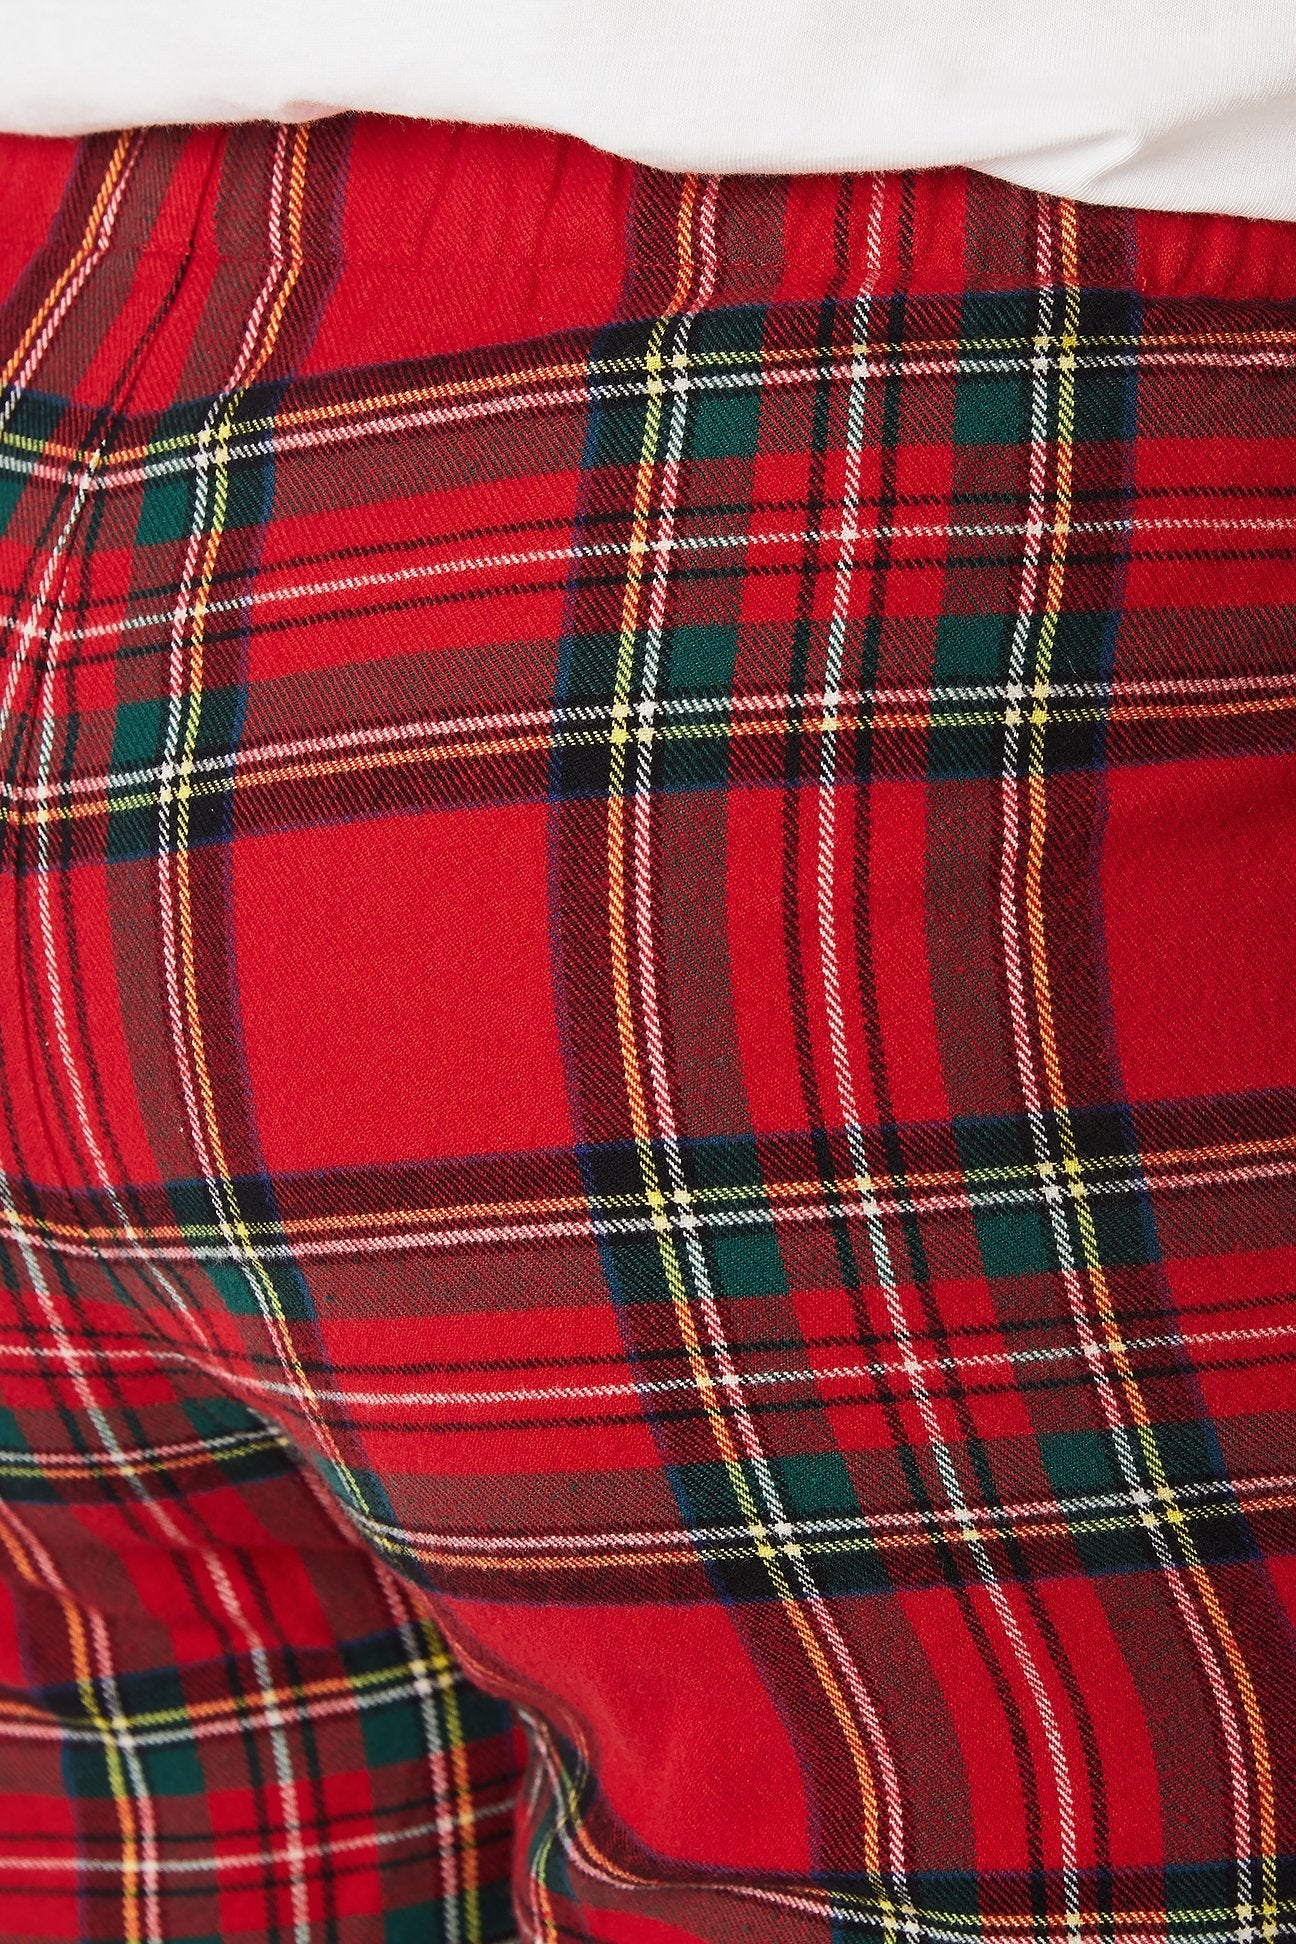 Royal Stewart Tartan Fabric Brushed 100% Cotton Colours Red & Green very  cosy 